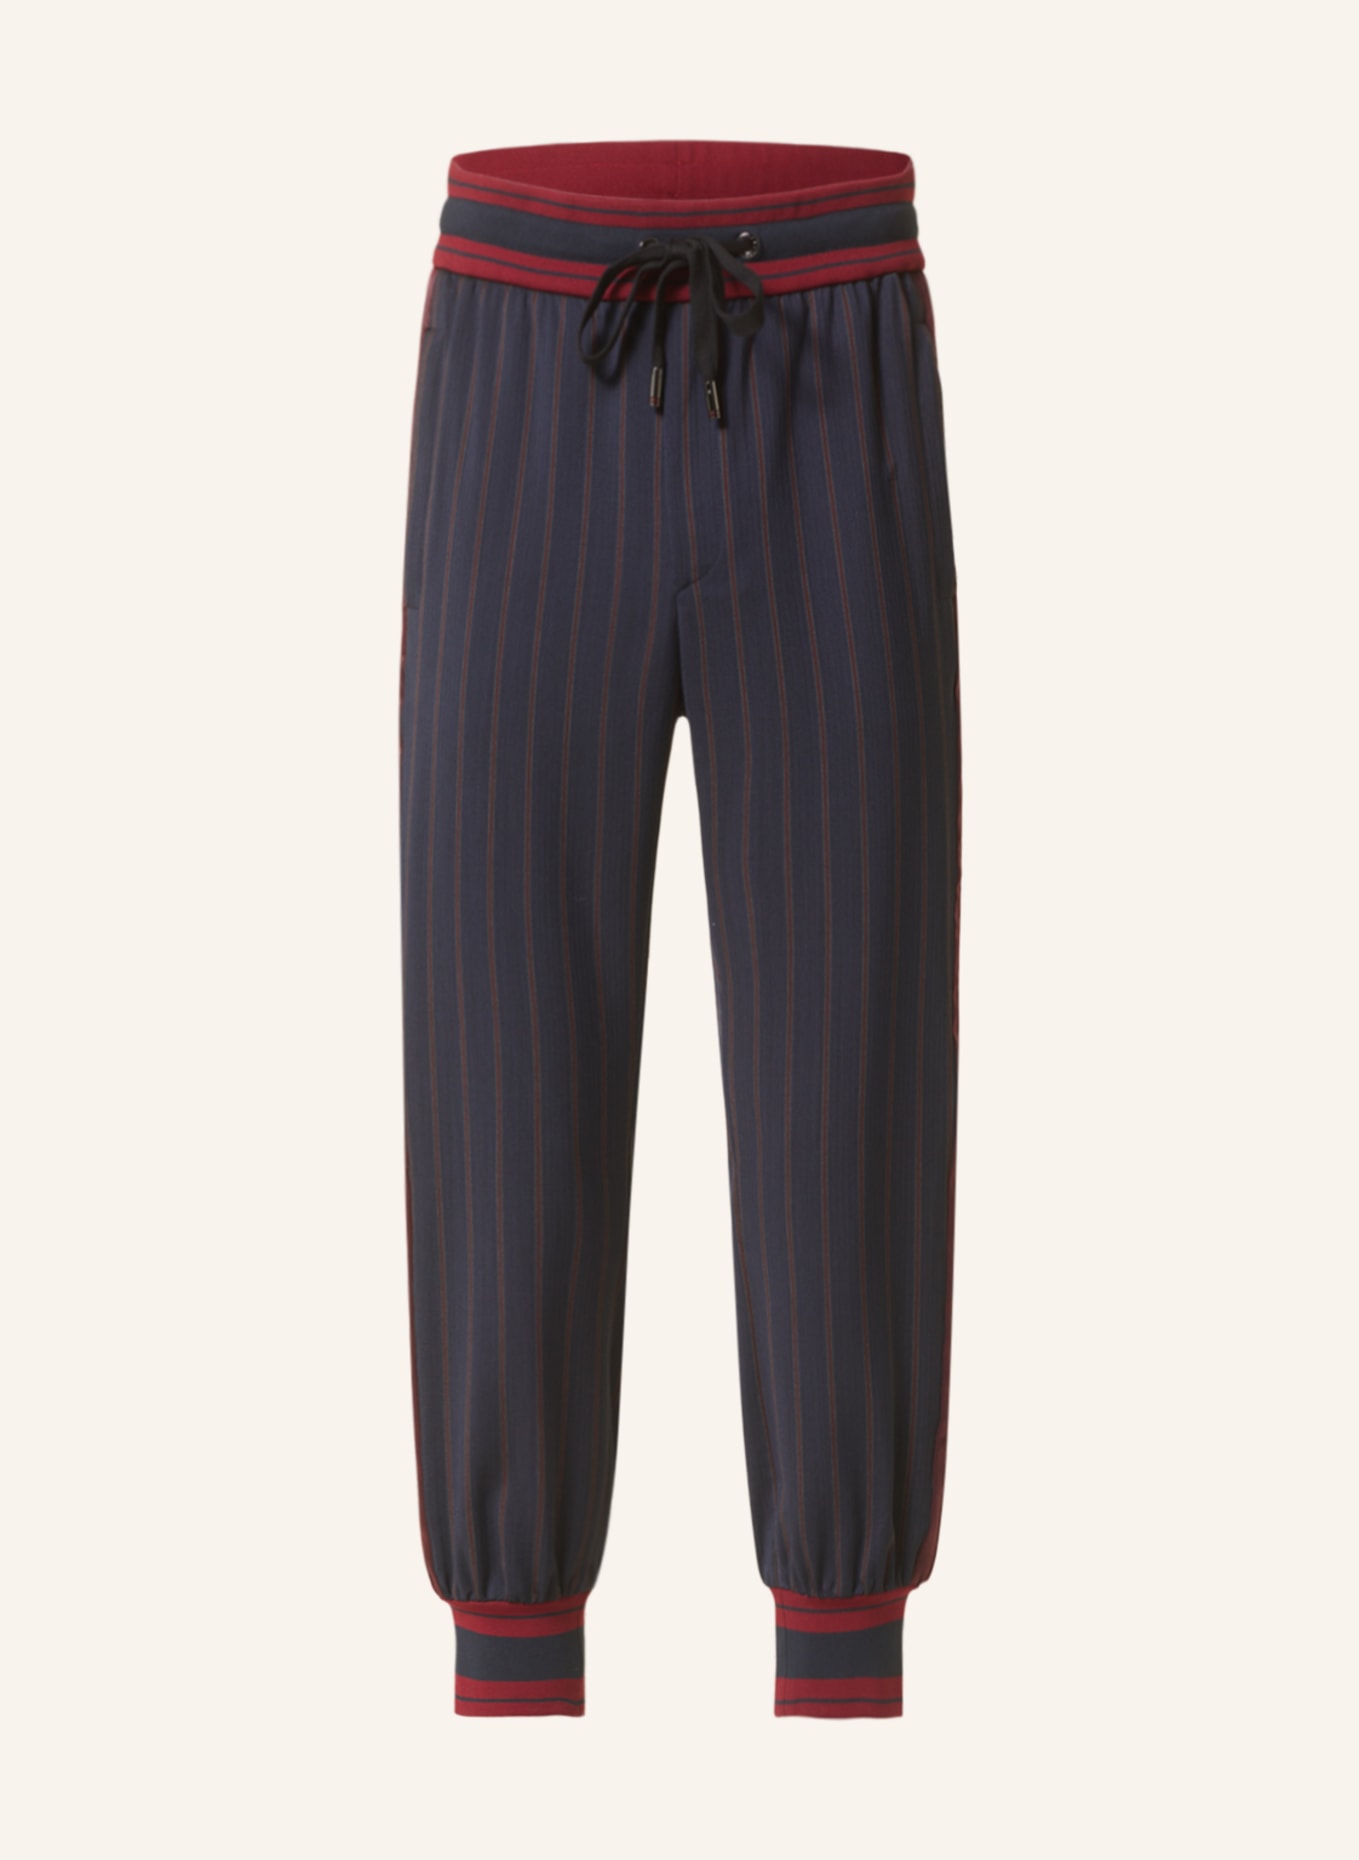 DOLCE & GABBANA Pants in jogger style with tuxedo stripes, Color: BLACK/ DARK RED (Image 1)